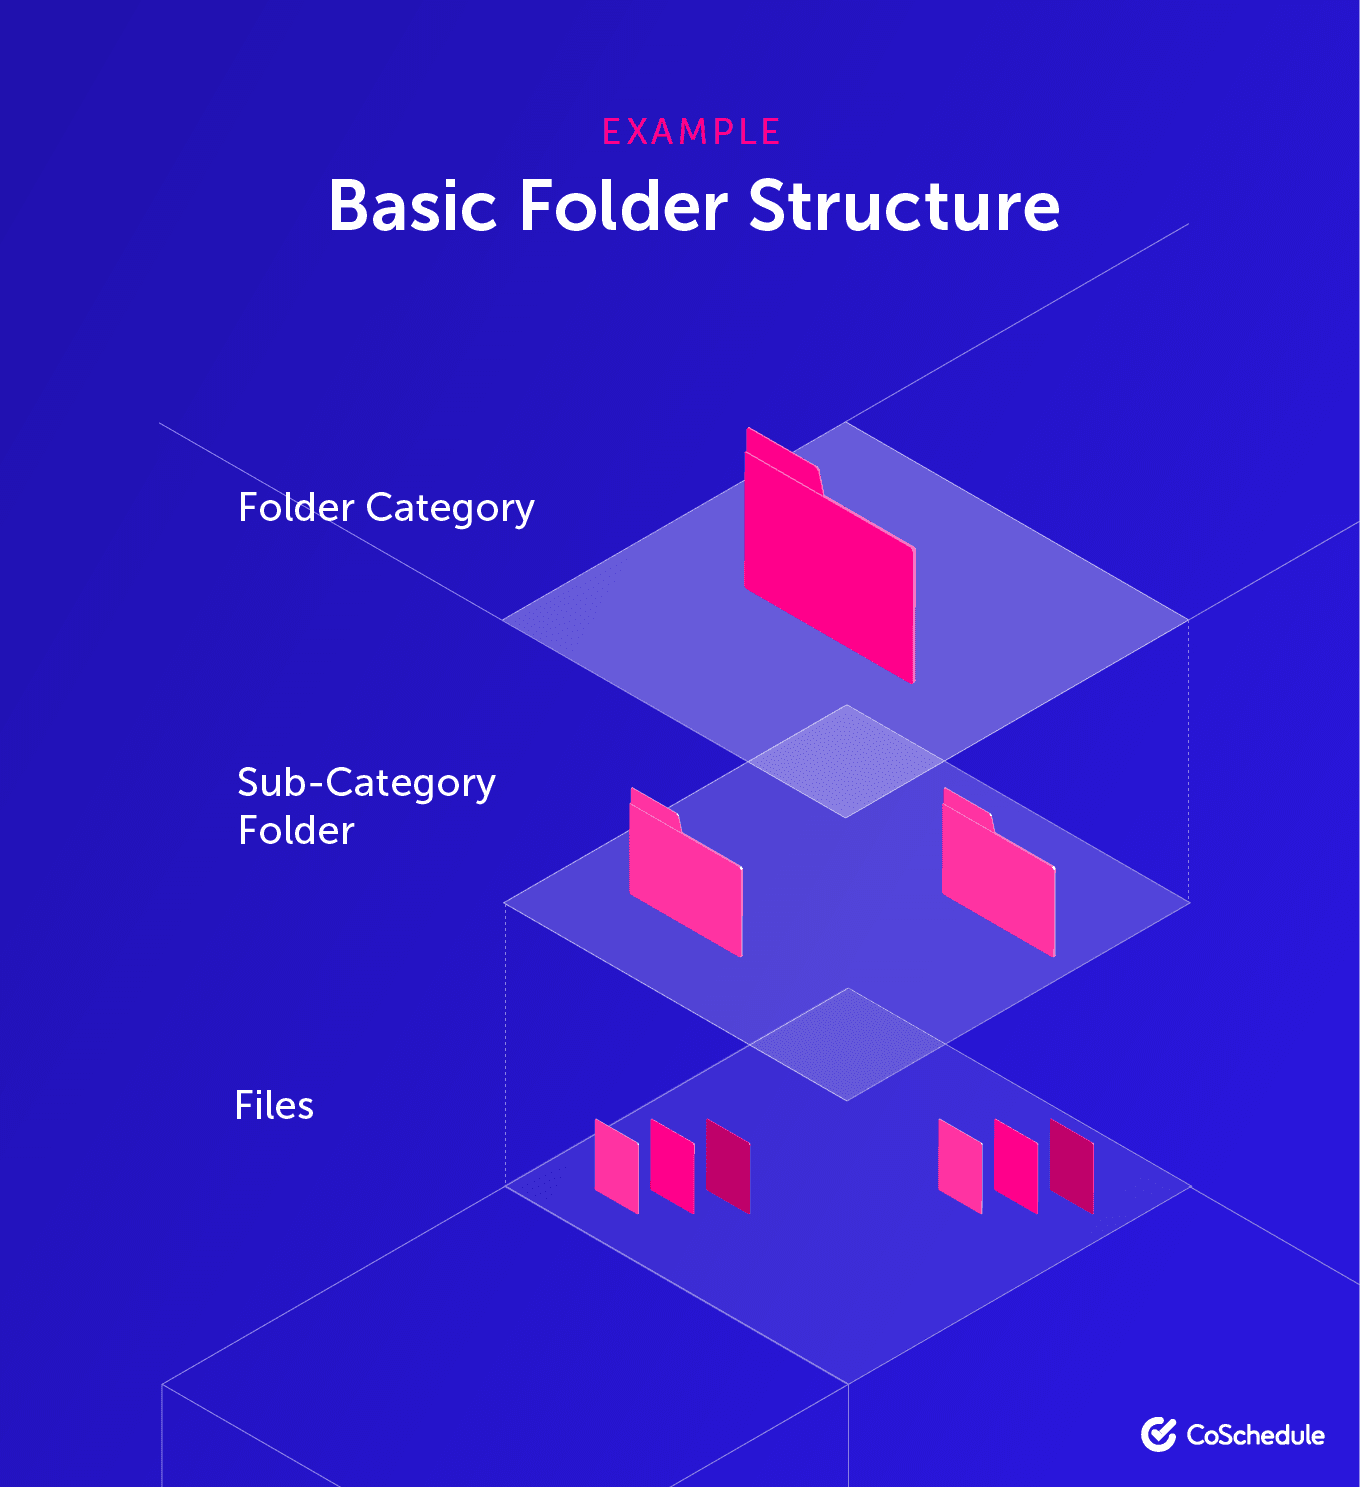 Example of a basic file folder structure